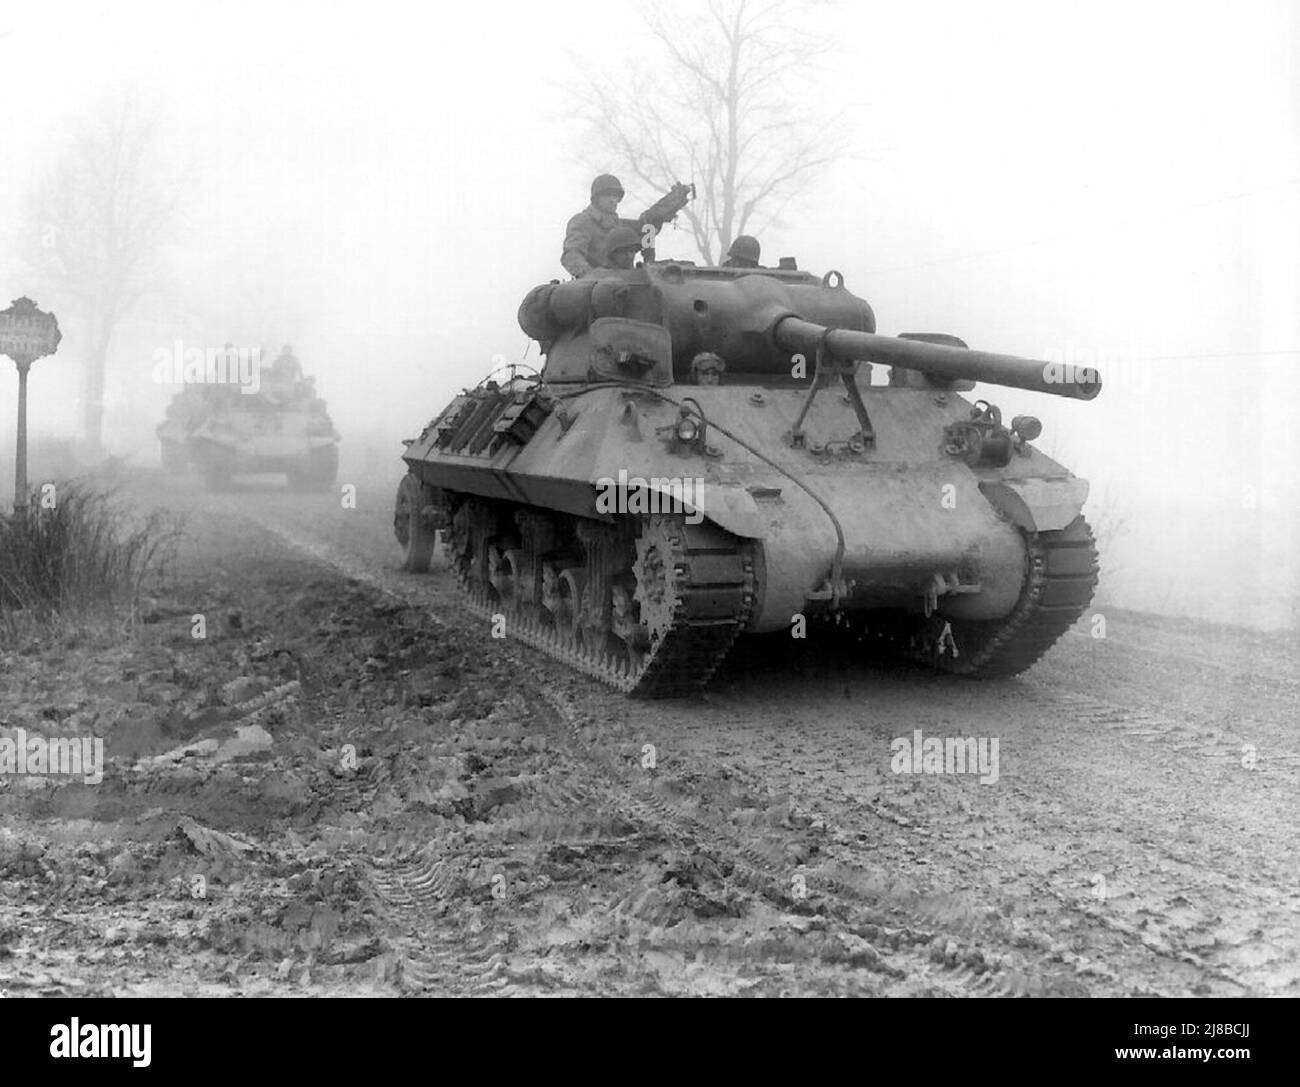 American M36 tank destroyers during the German Ardennes counter-offensive (known as Battle of the Bulge) in 1944 during World War 2 Stock Photo